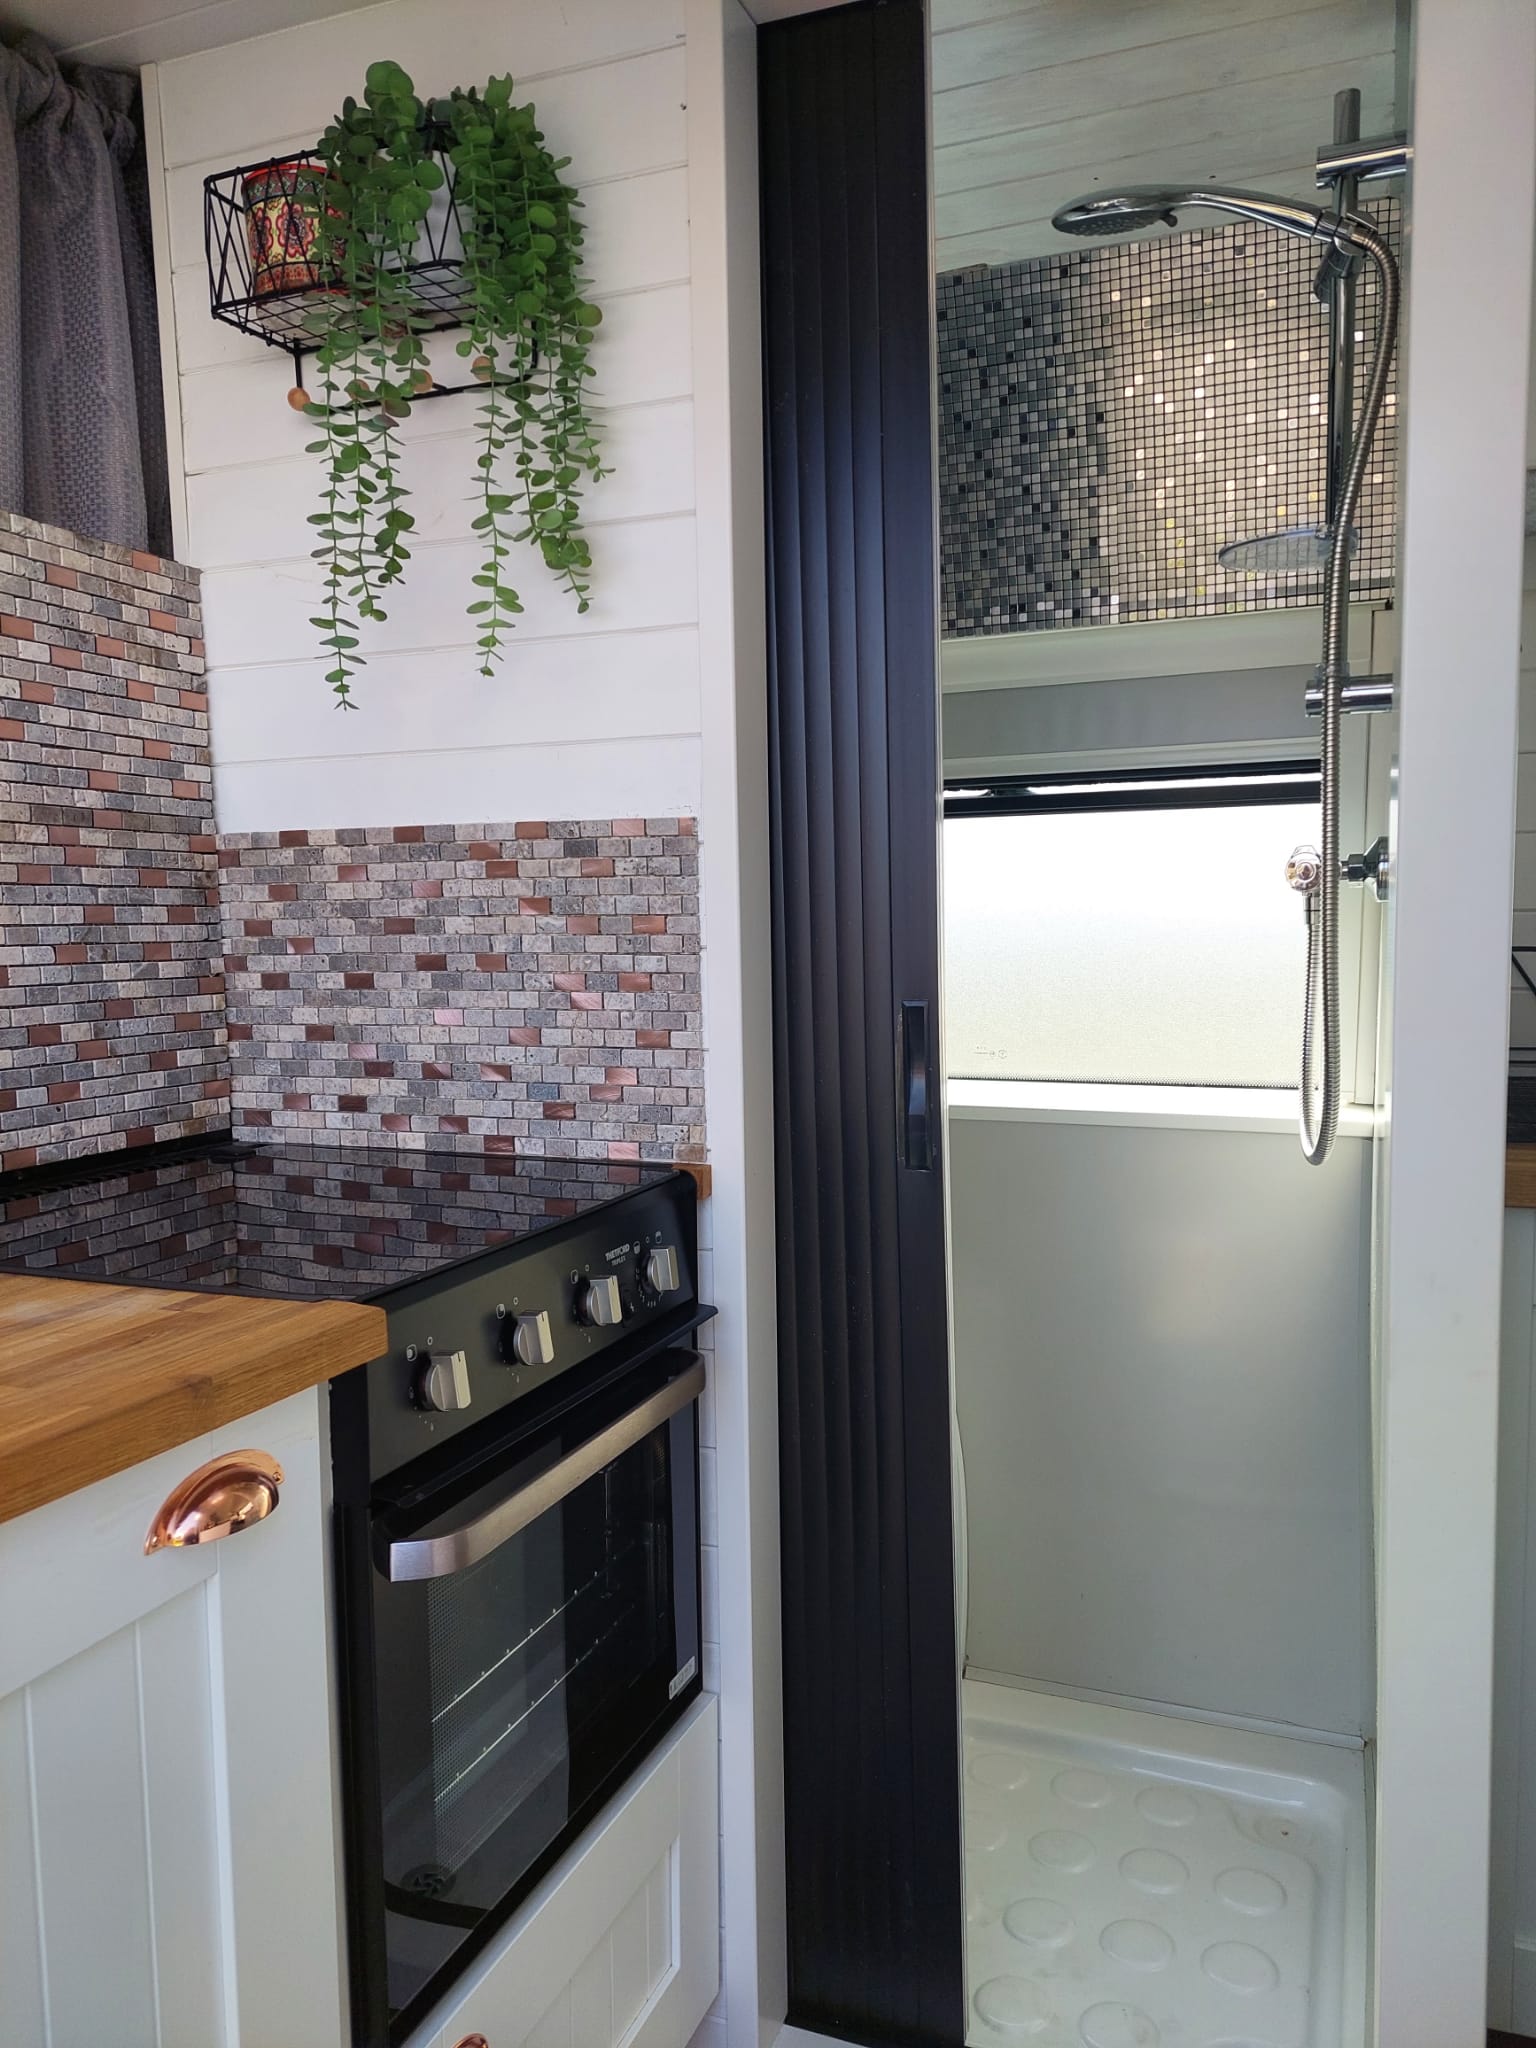 A compact, modern kitchen features a black stove with an oven, wooden countertops, and a white tile backsplash with gray and red accents. A black shower door opens to reveal a small shower area with gray mosaic tiles. Above the stove, a hanging metal basket holds green trailing plants.